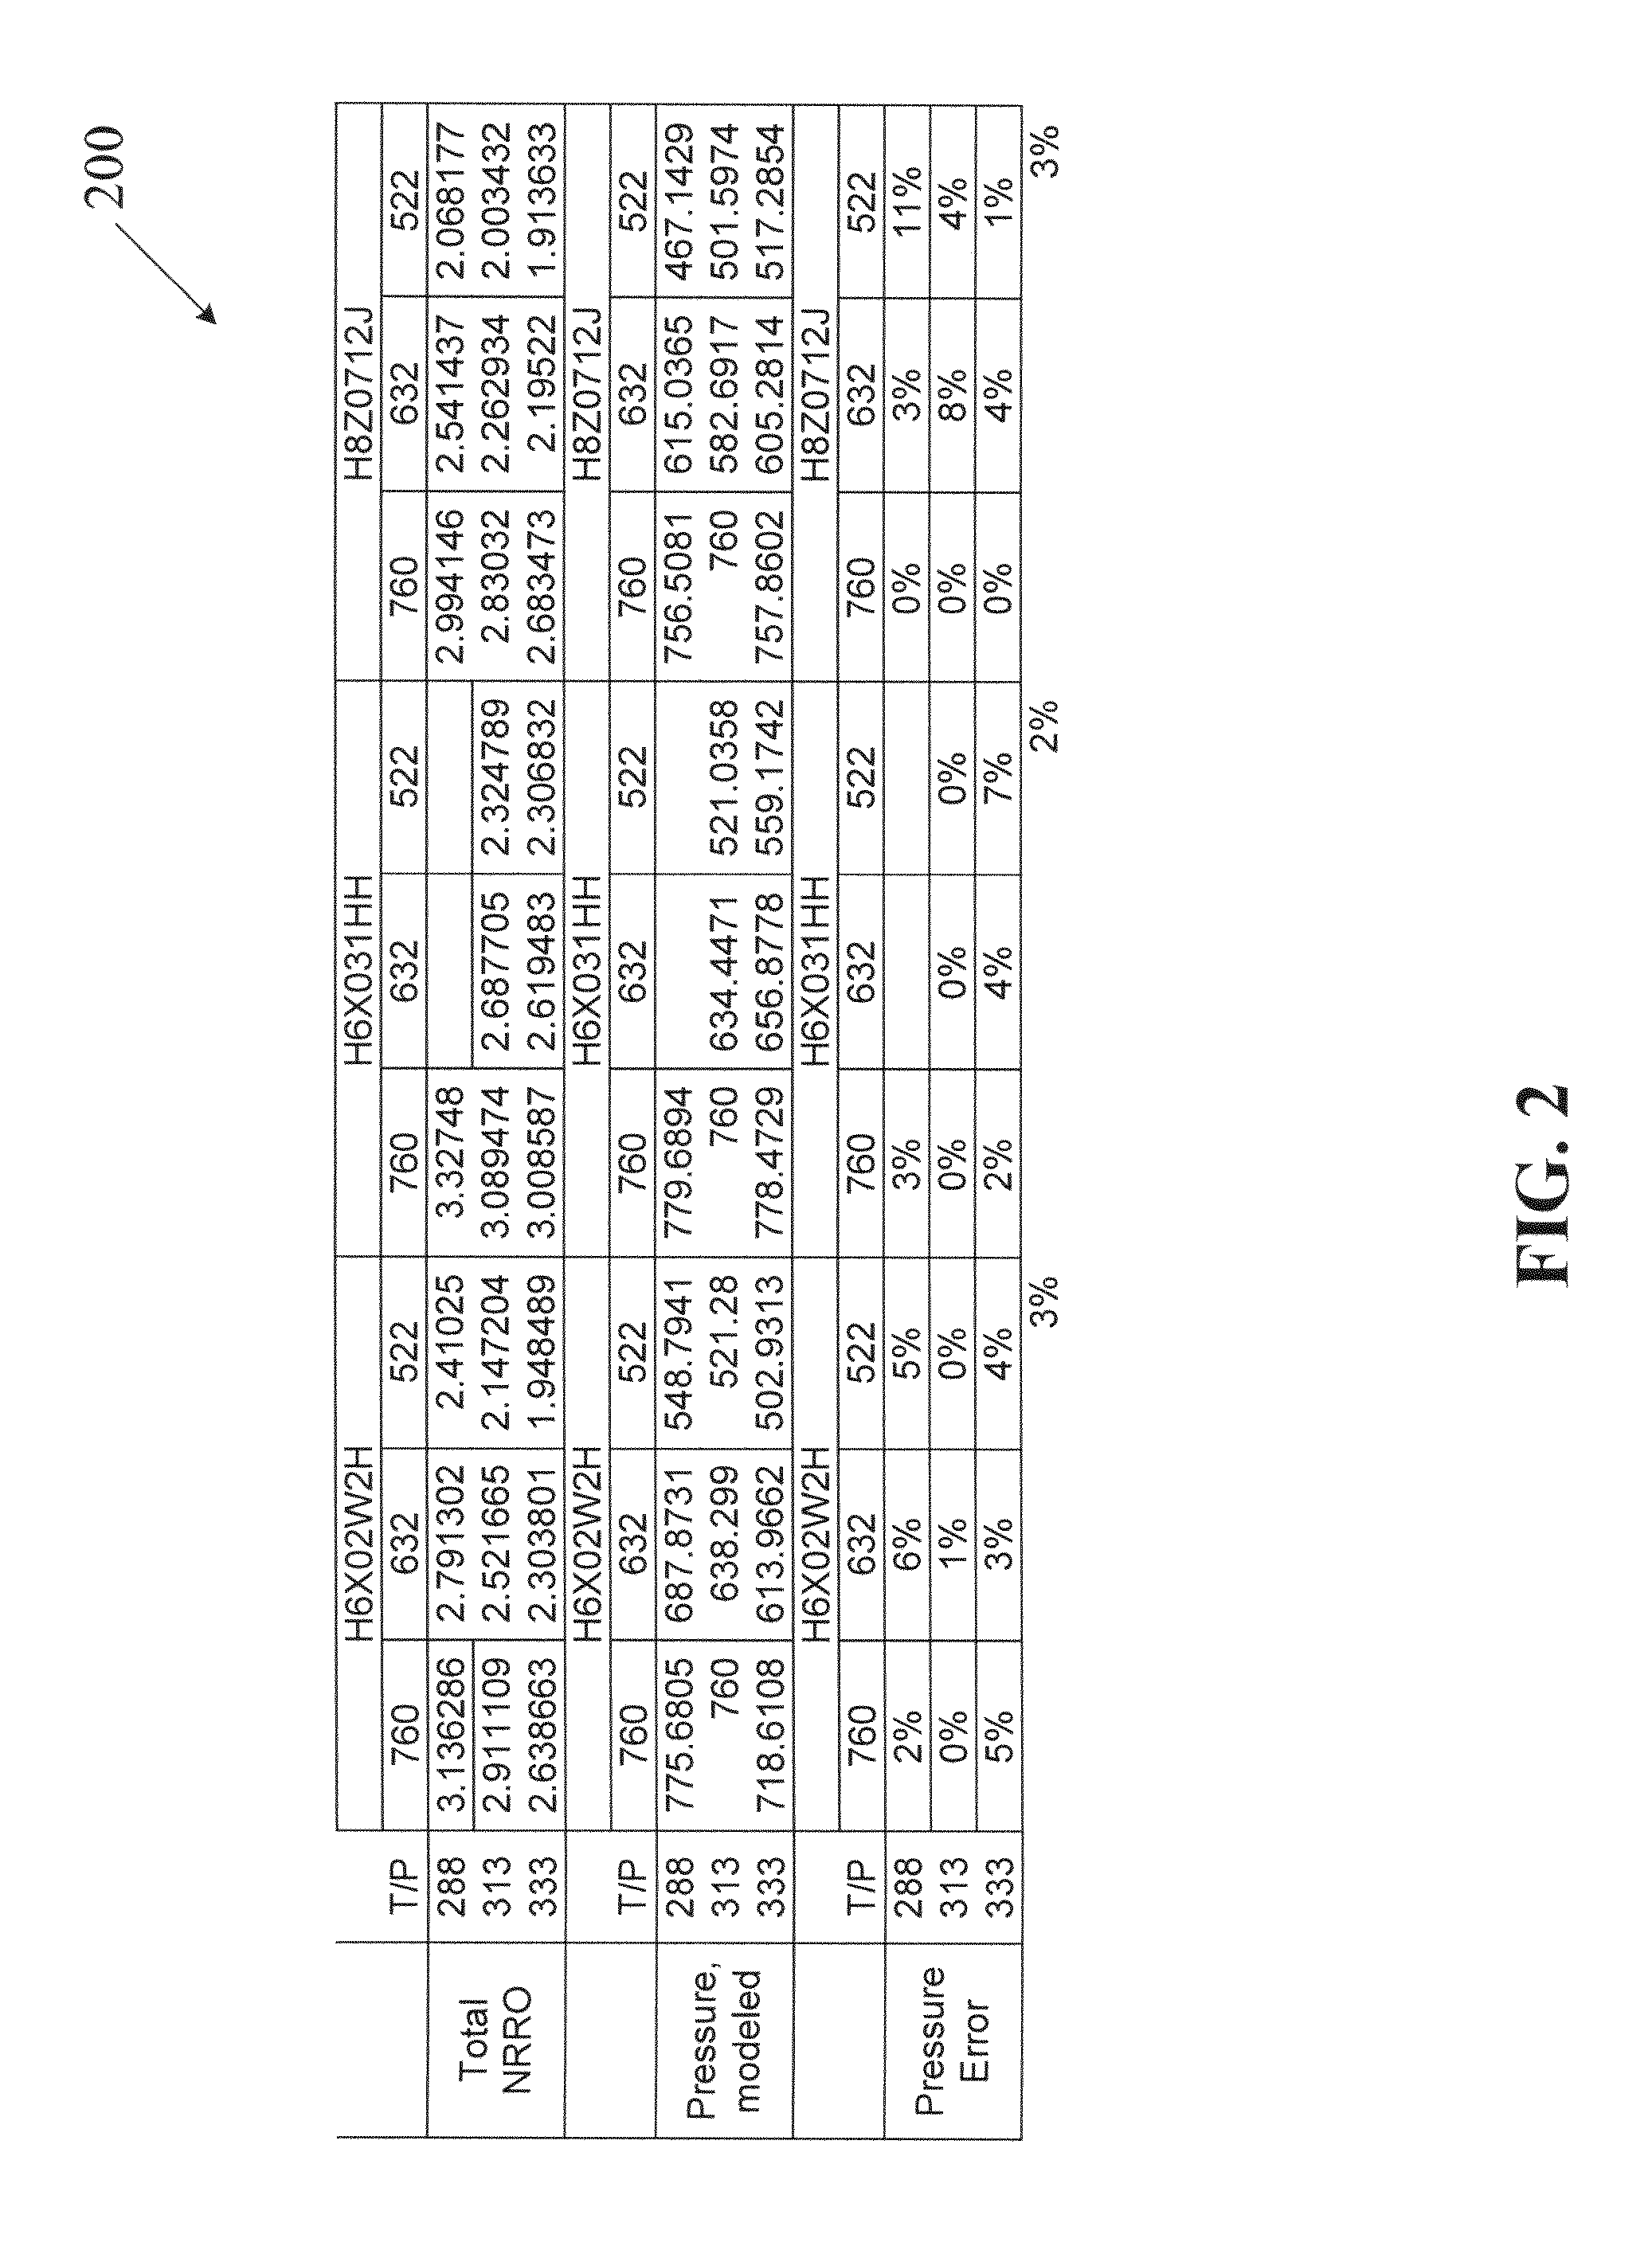 Fly height compensation using temperature and non-repeatable runouts